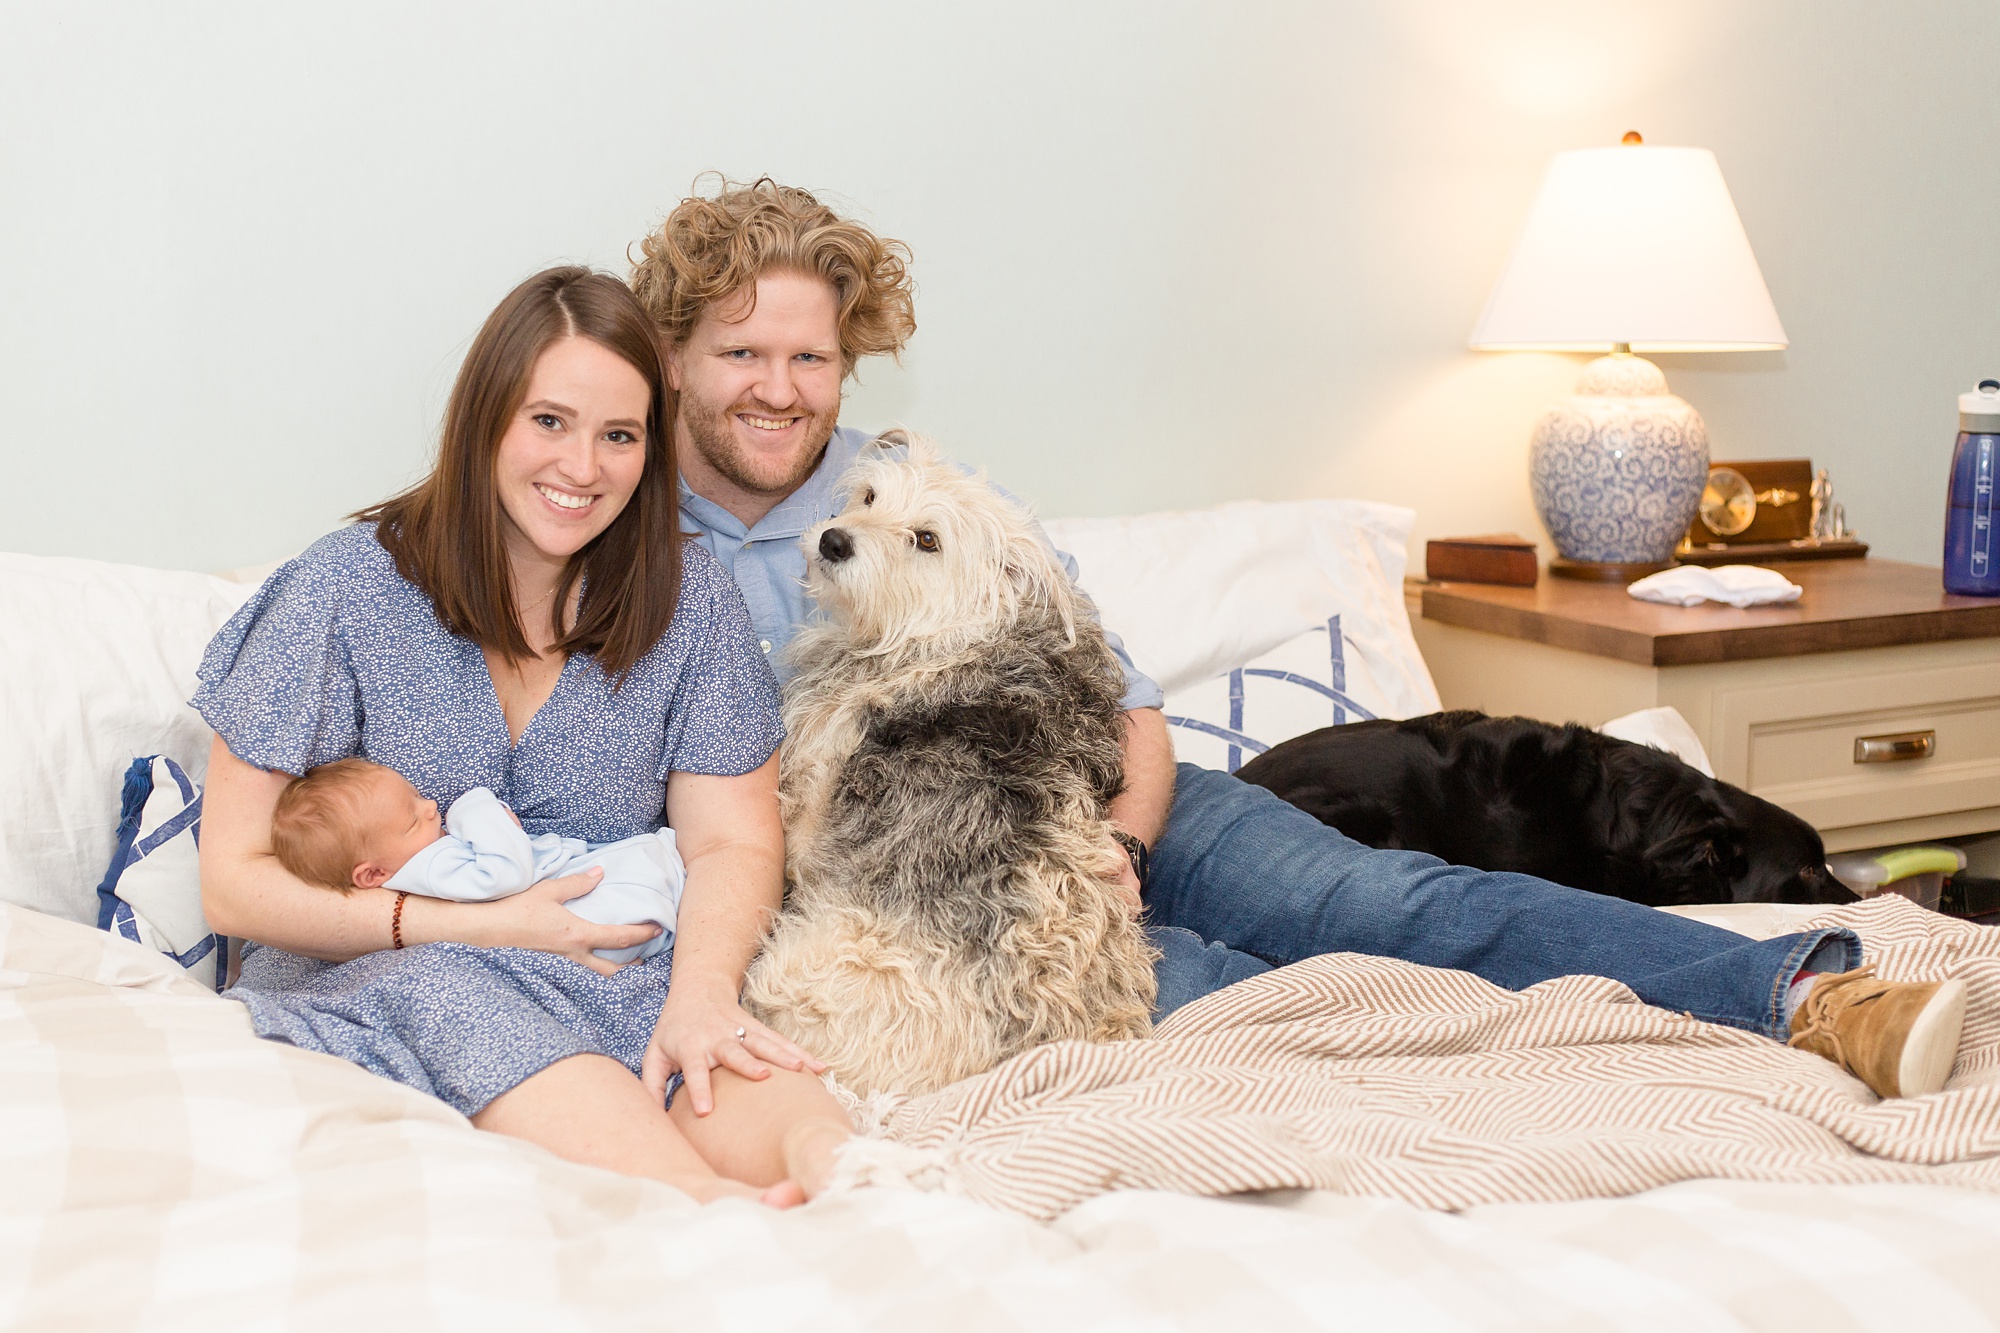 parents sit on bed with new baby boy and dog in Nashville TN home